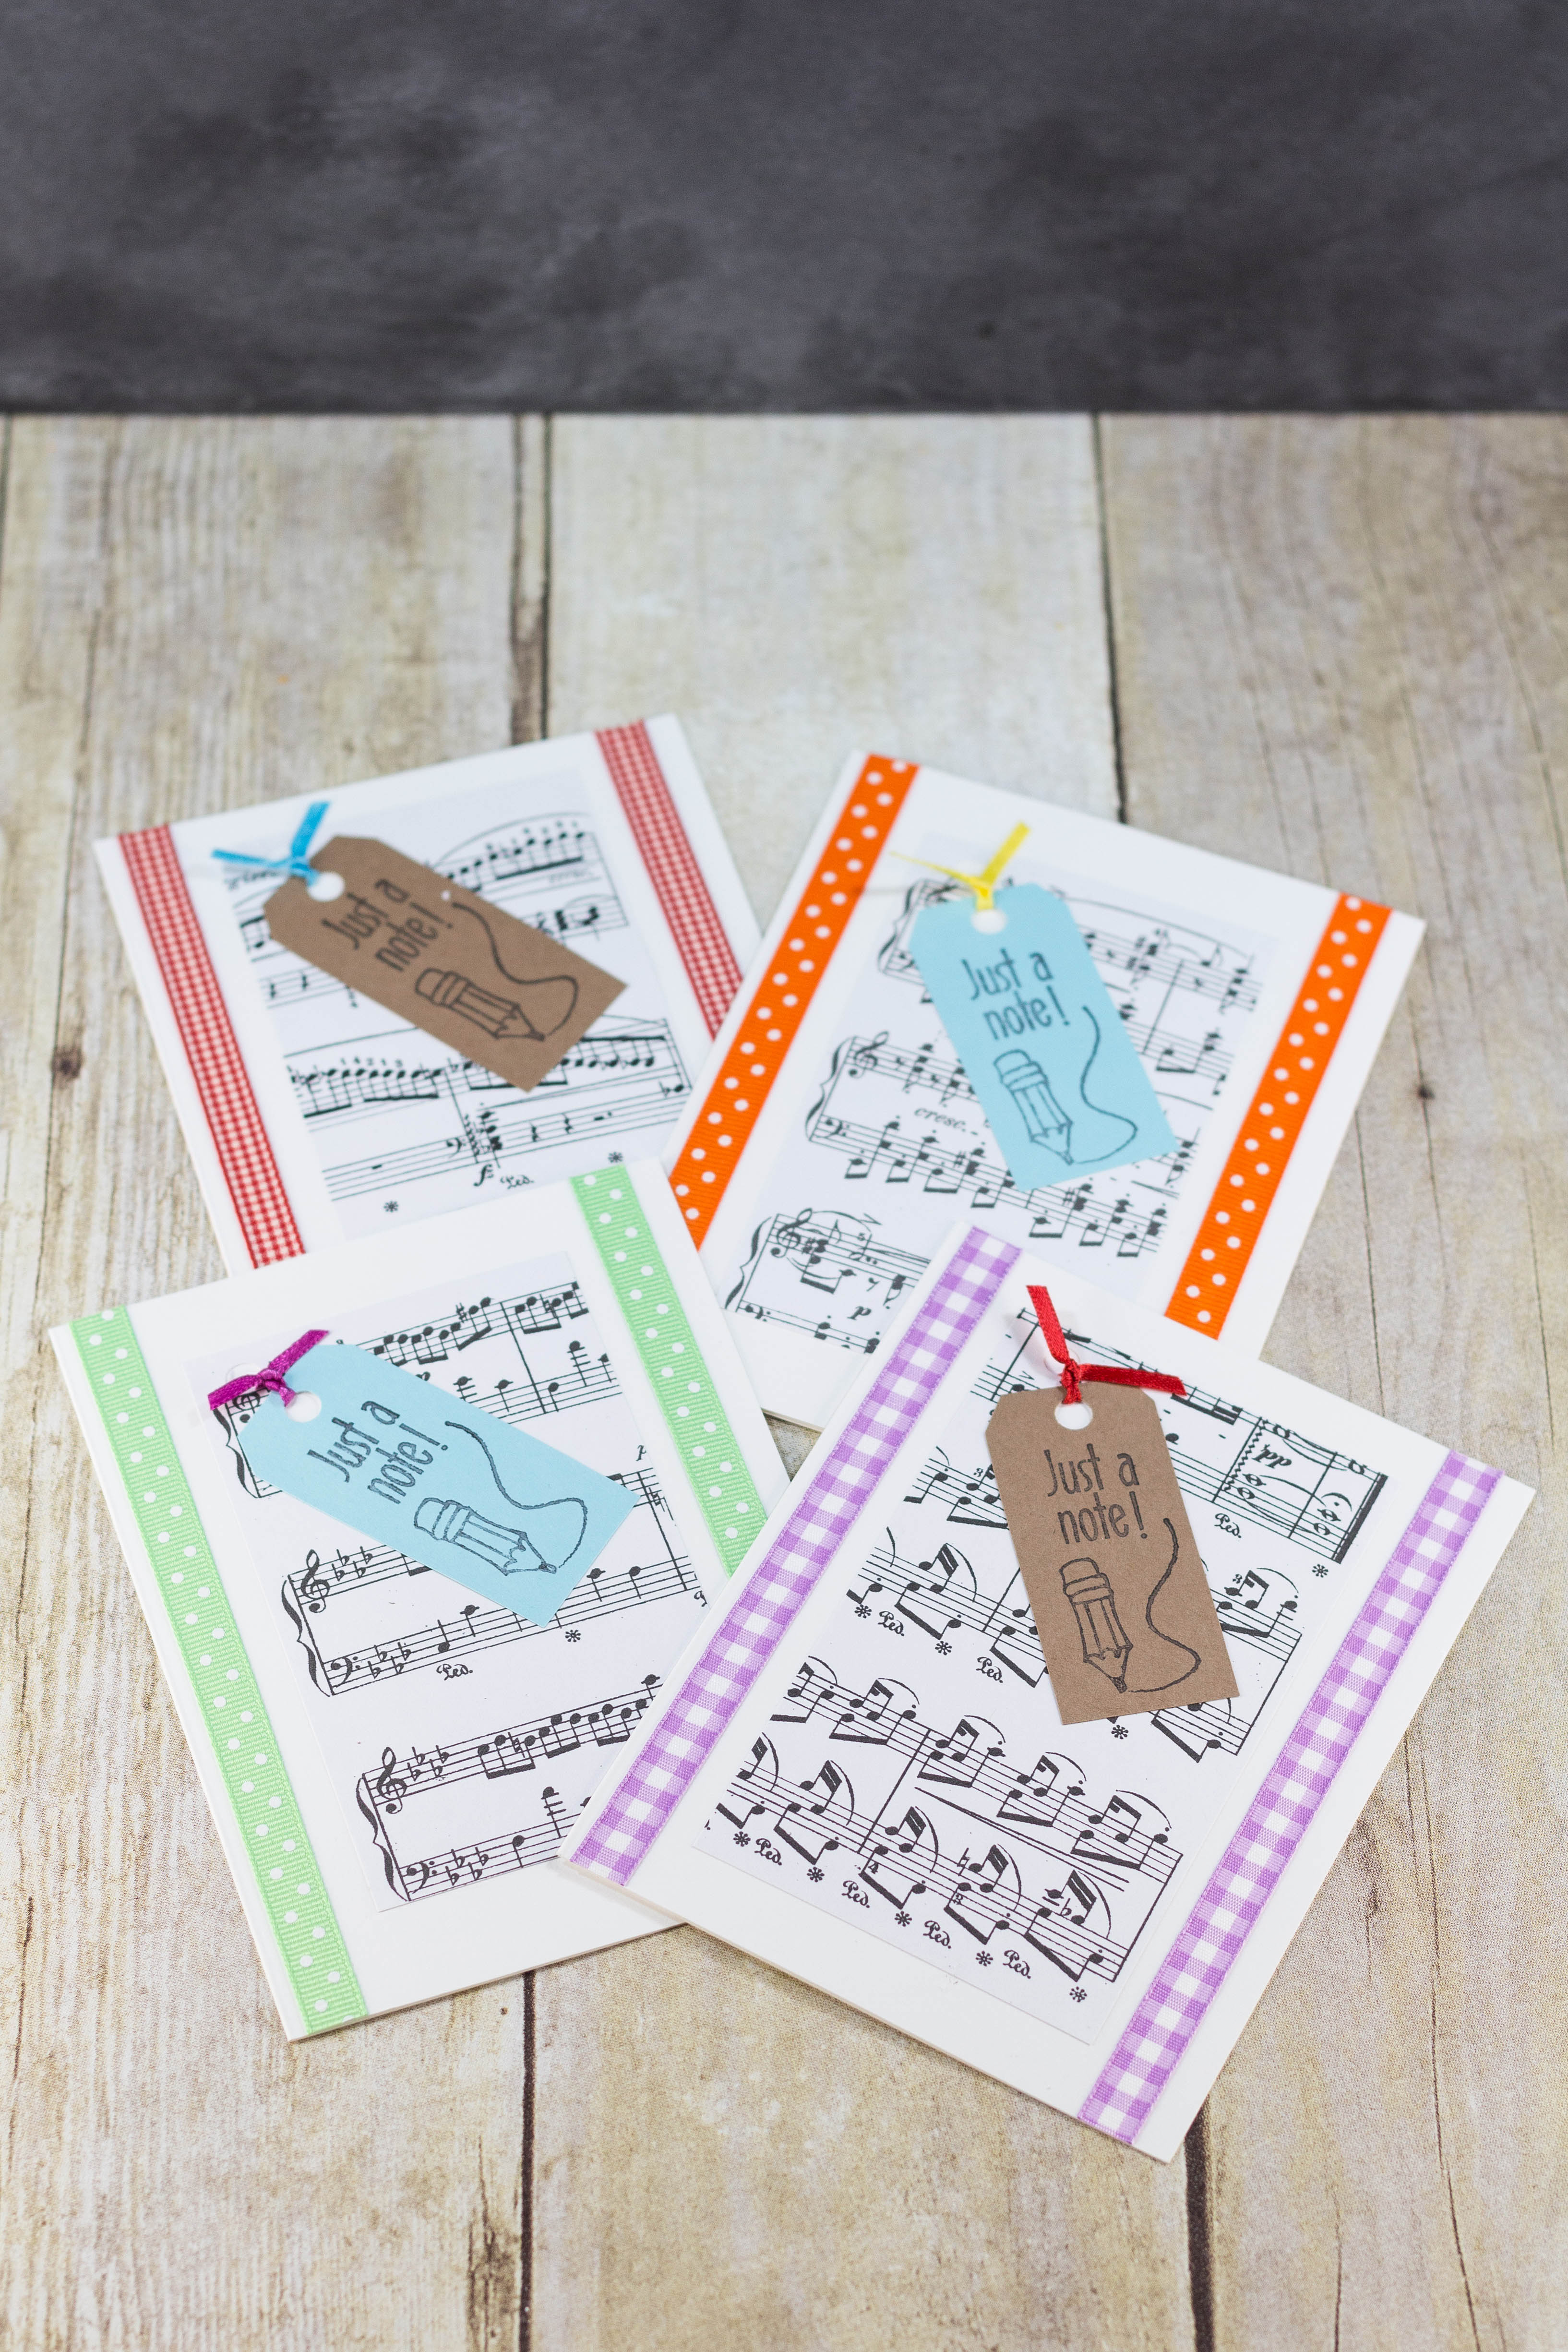 DIY Just a Note Sheet Music Greeting Card Tutorial | https://www.roseclearfield.com